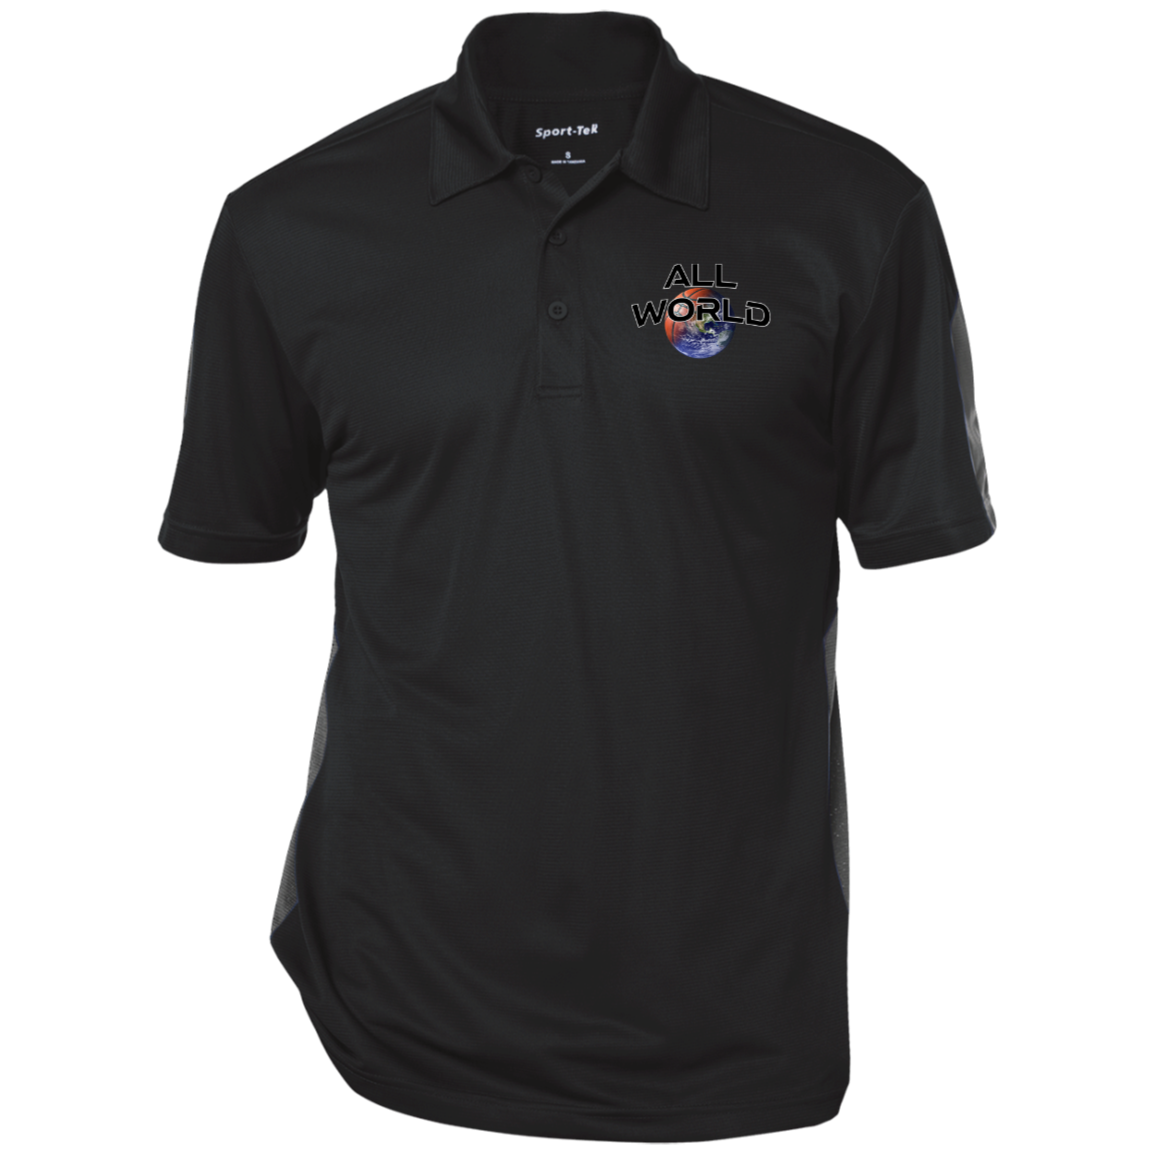 All World Performance Textured Polo